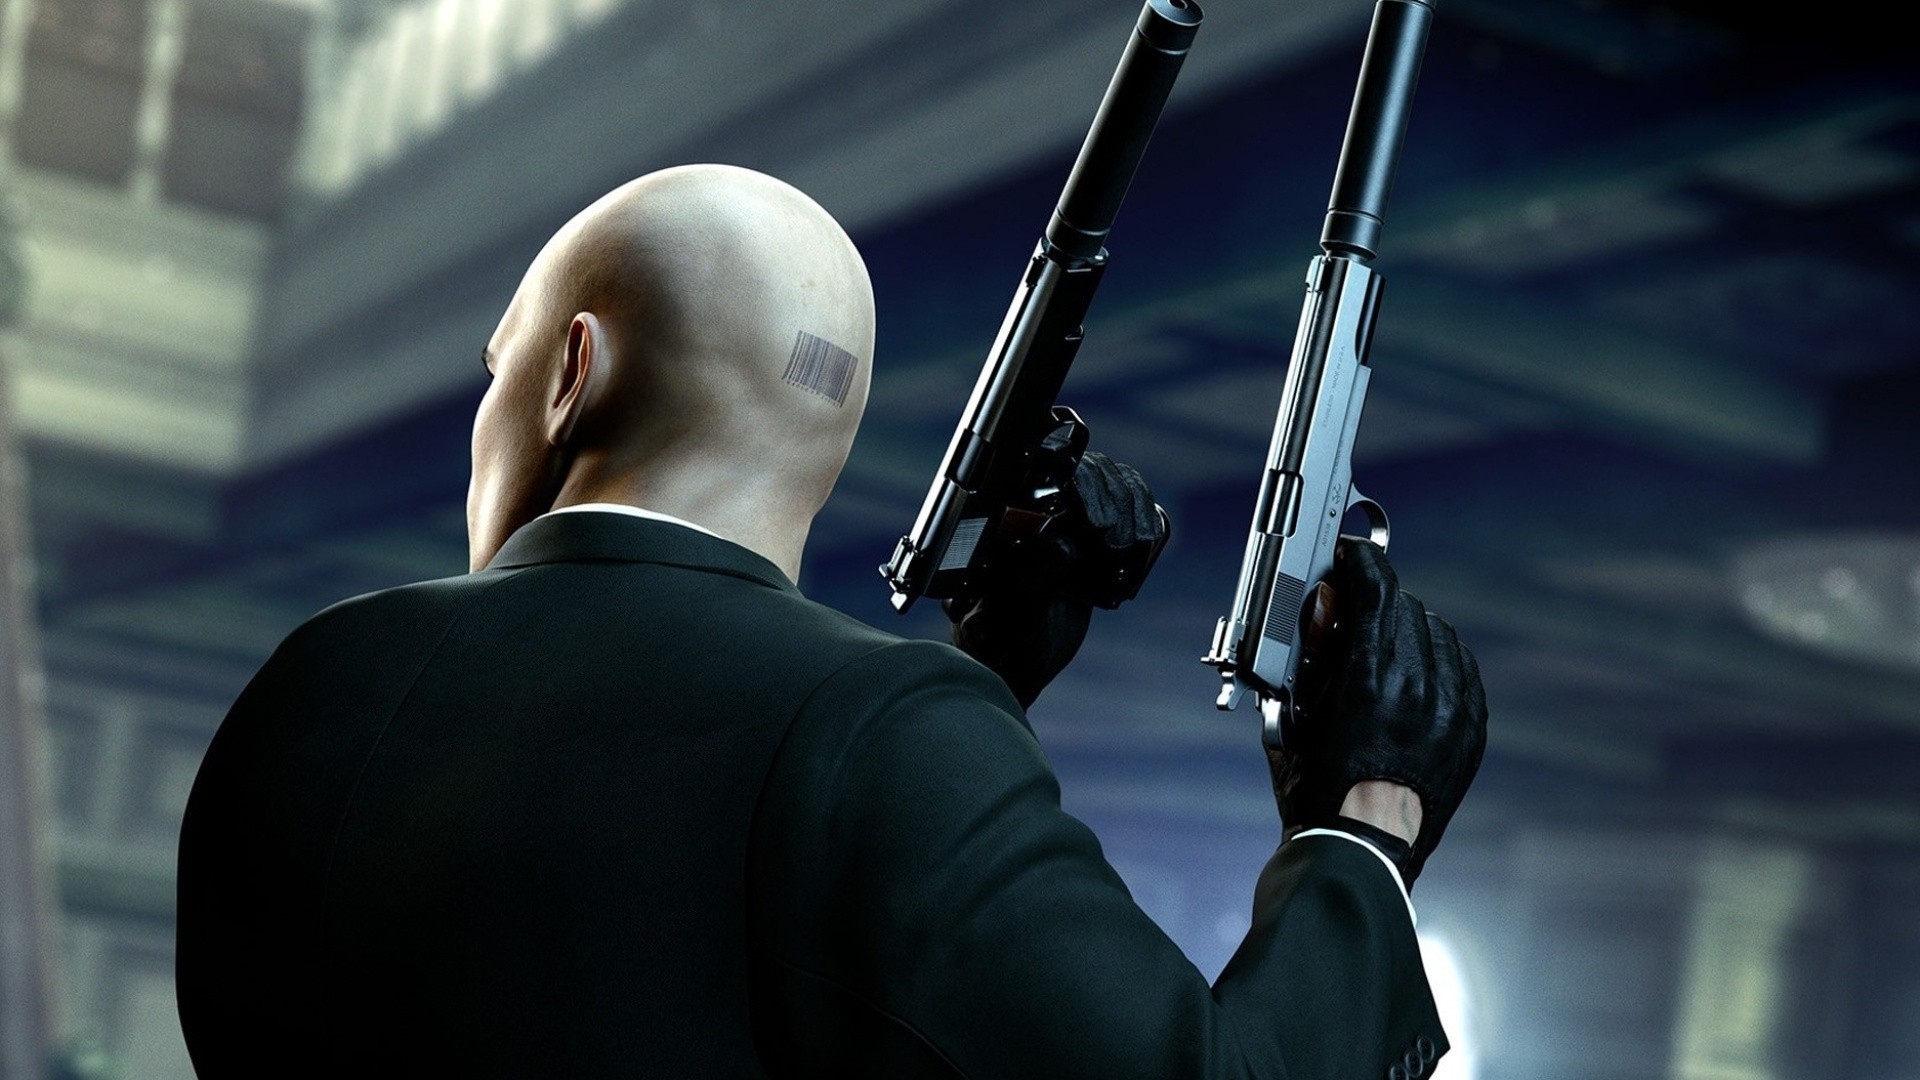 Hitman video game hd tv shows k wallpapers images backgrounds photos and pictures